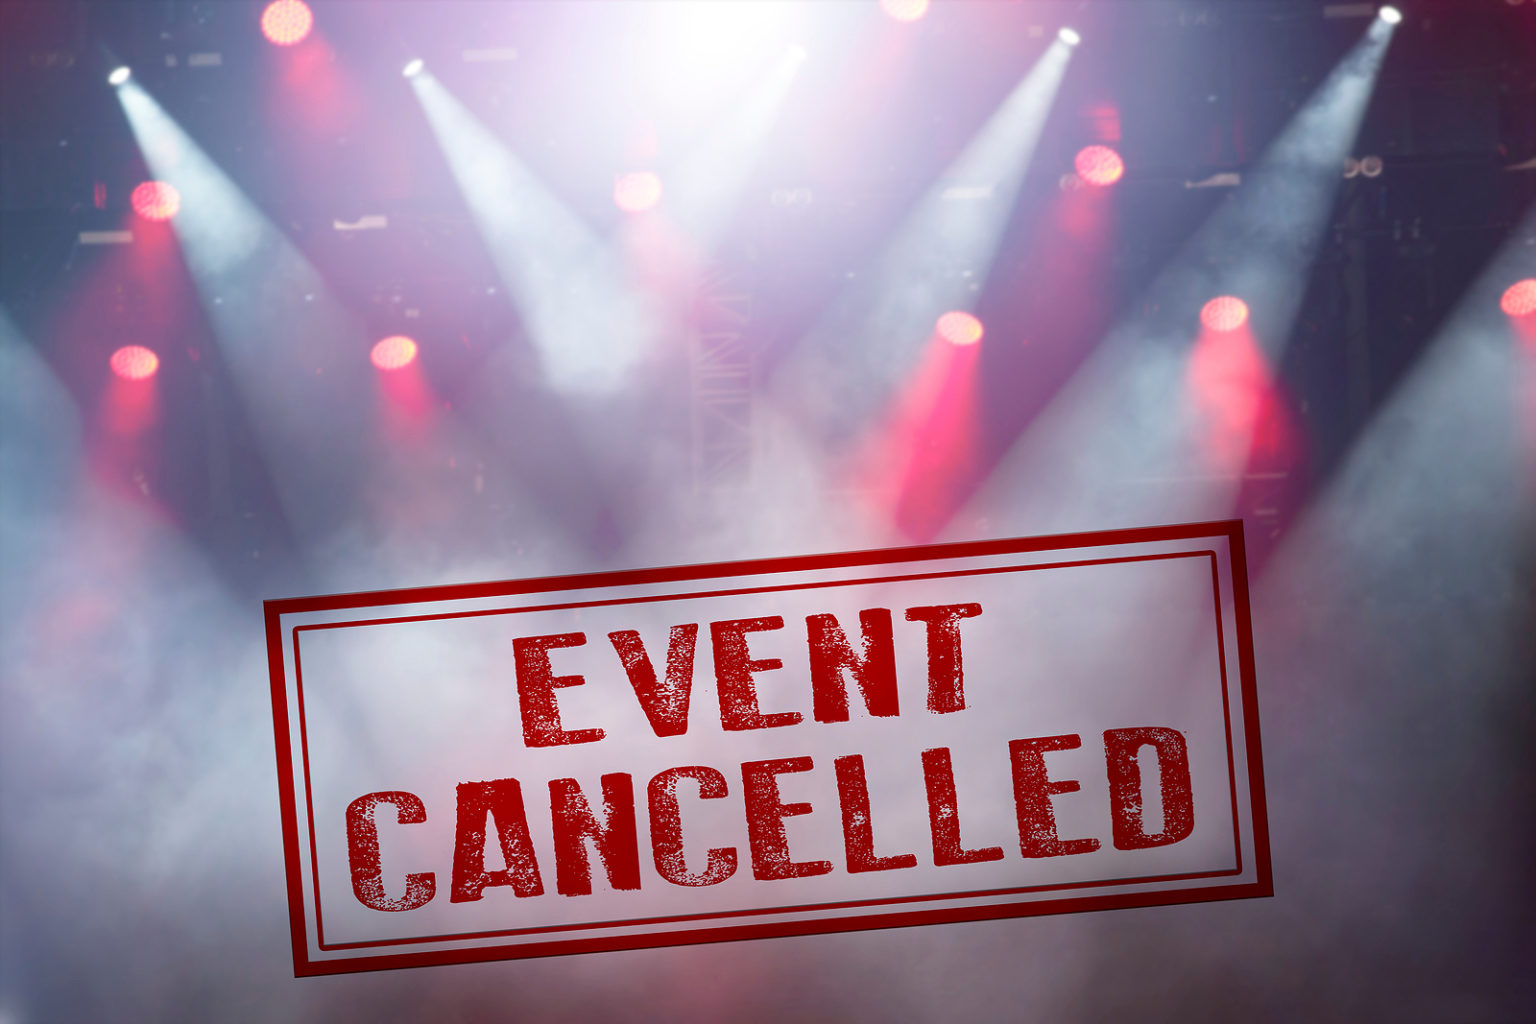 Cancelled concert or other event to avoid Coronavirus outbreaks